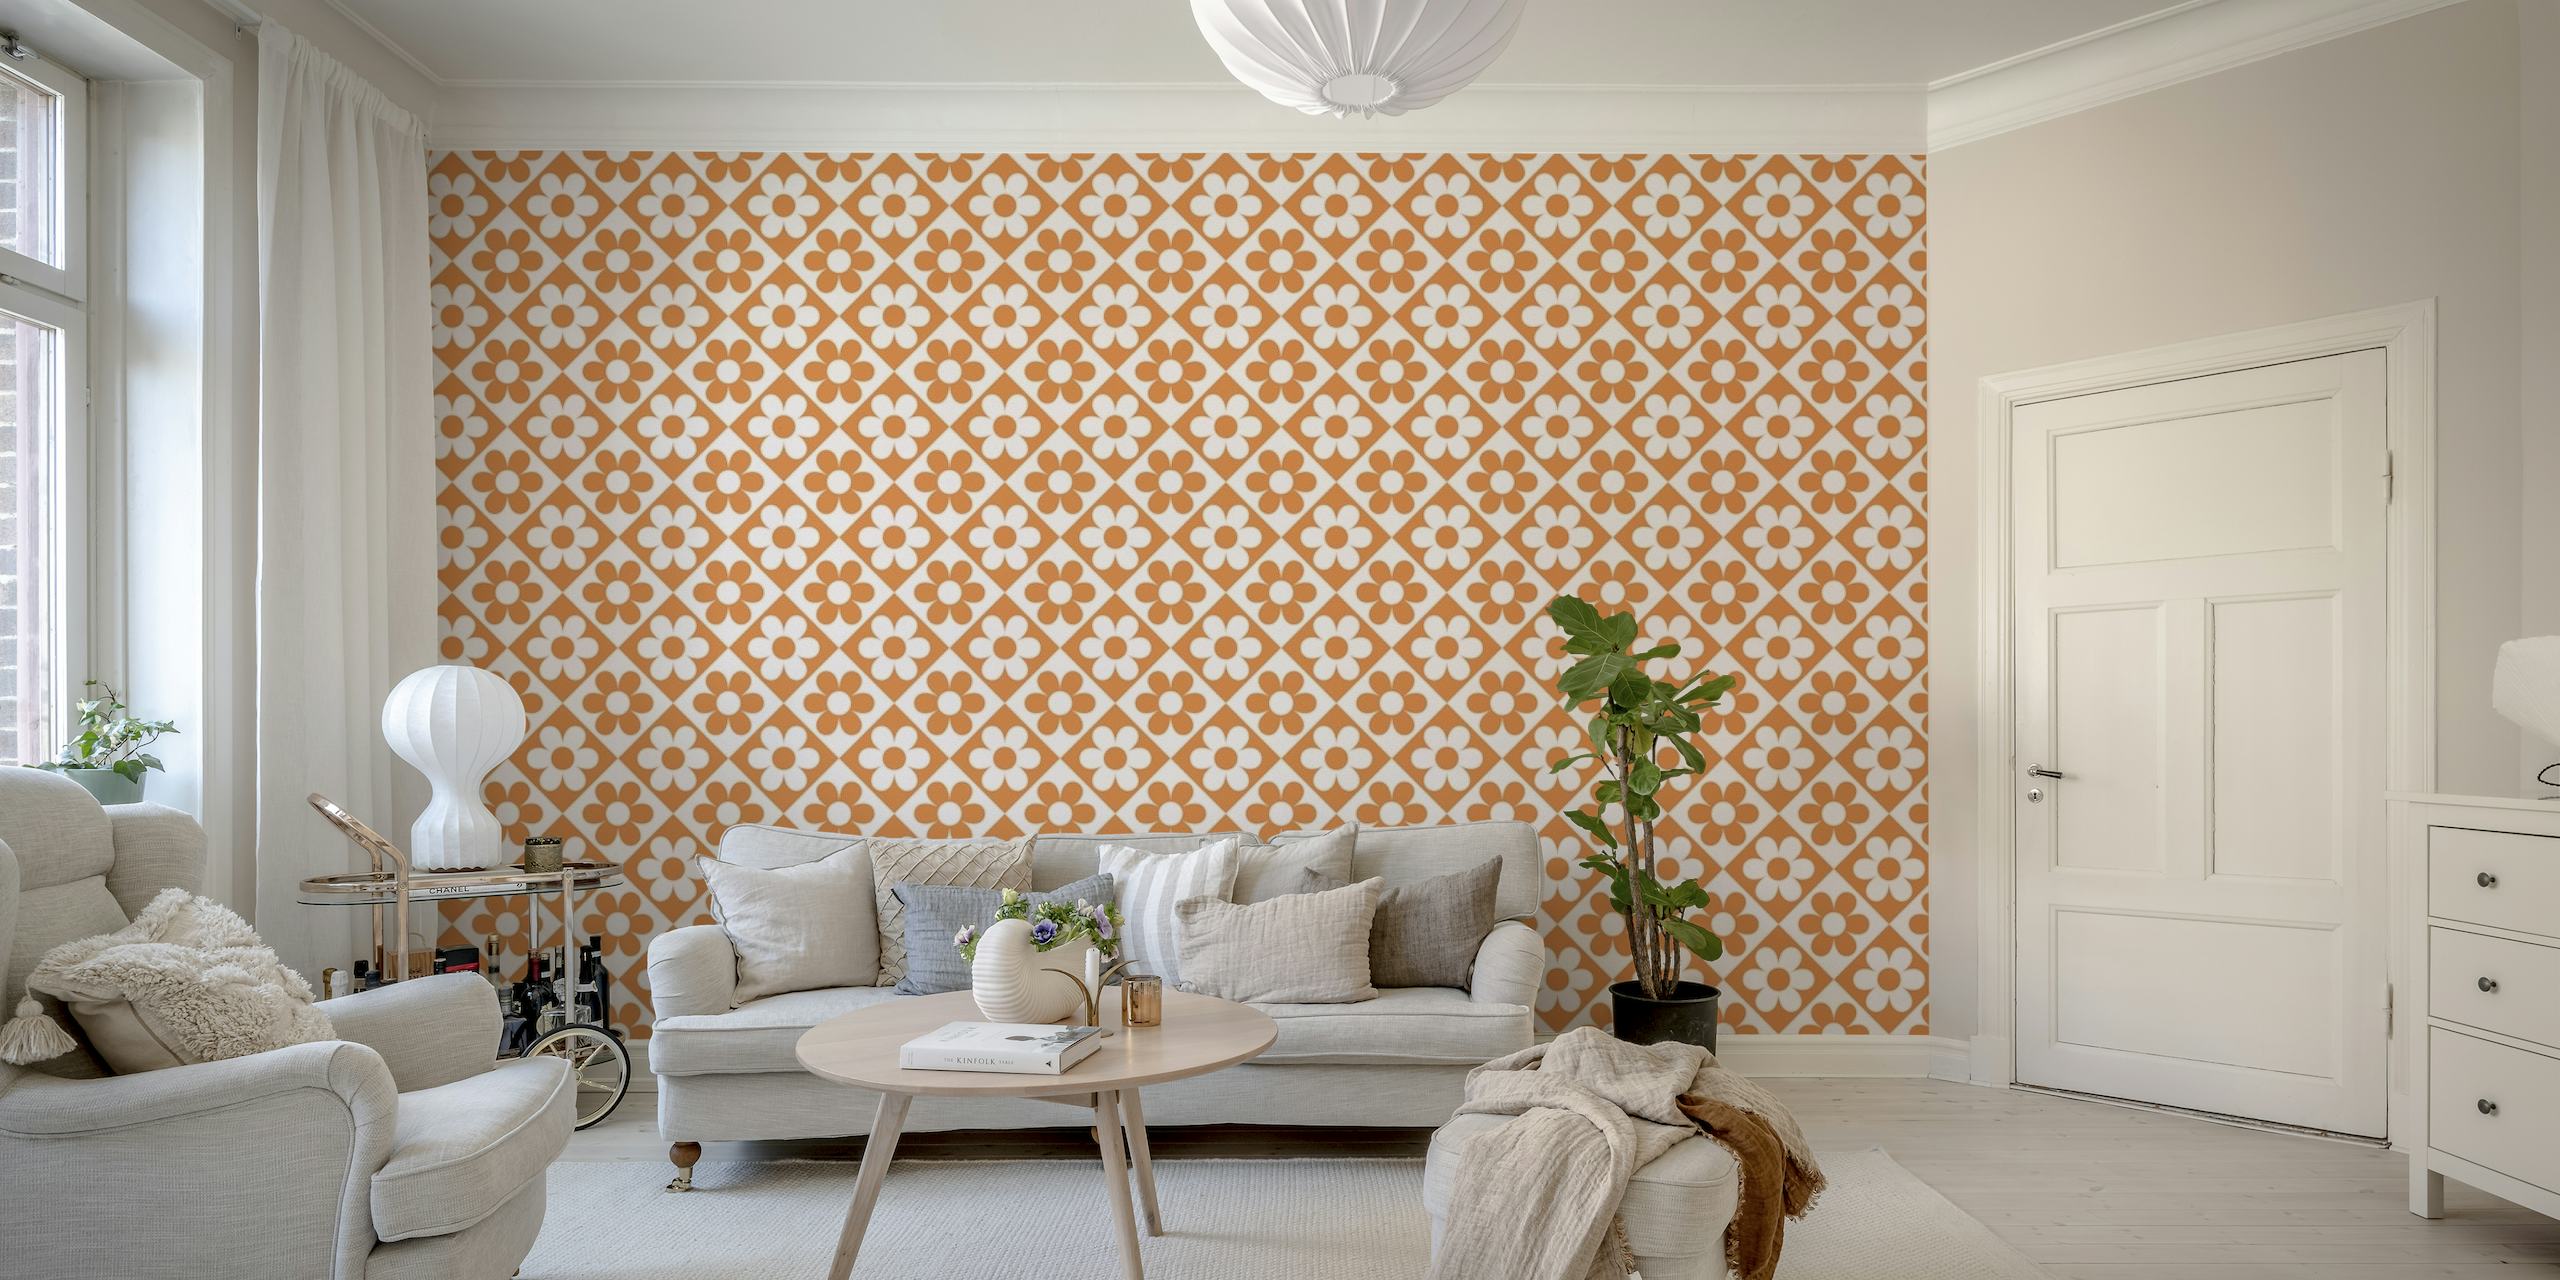 Orange floral and geometric pattern wall mural